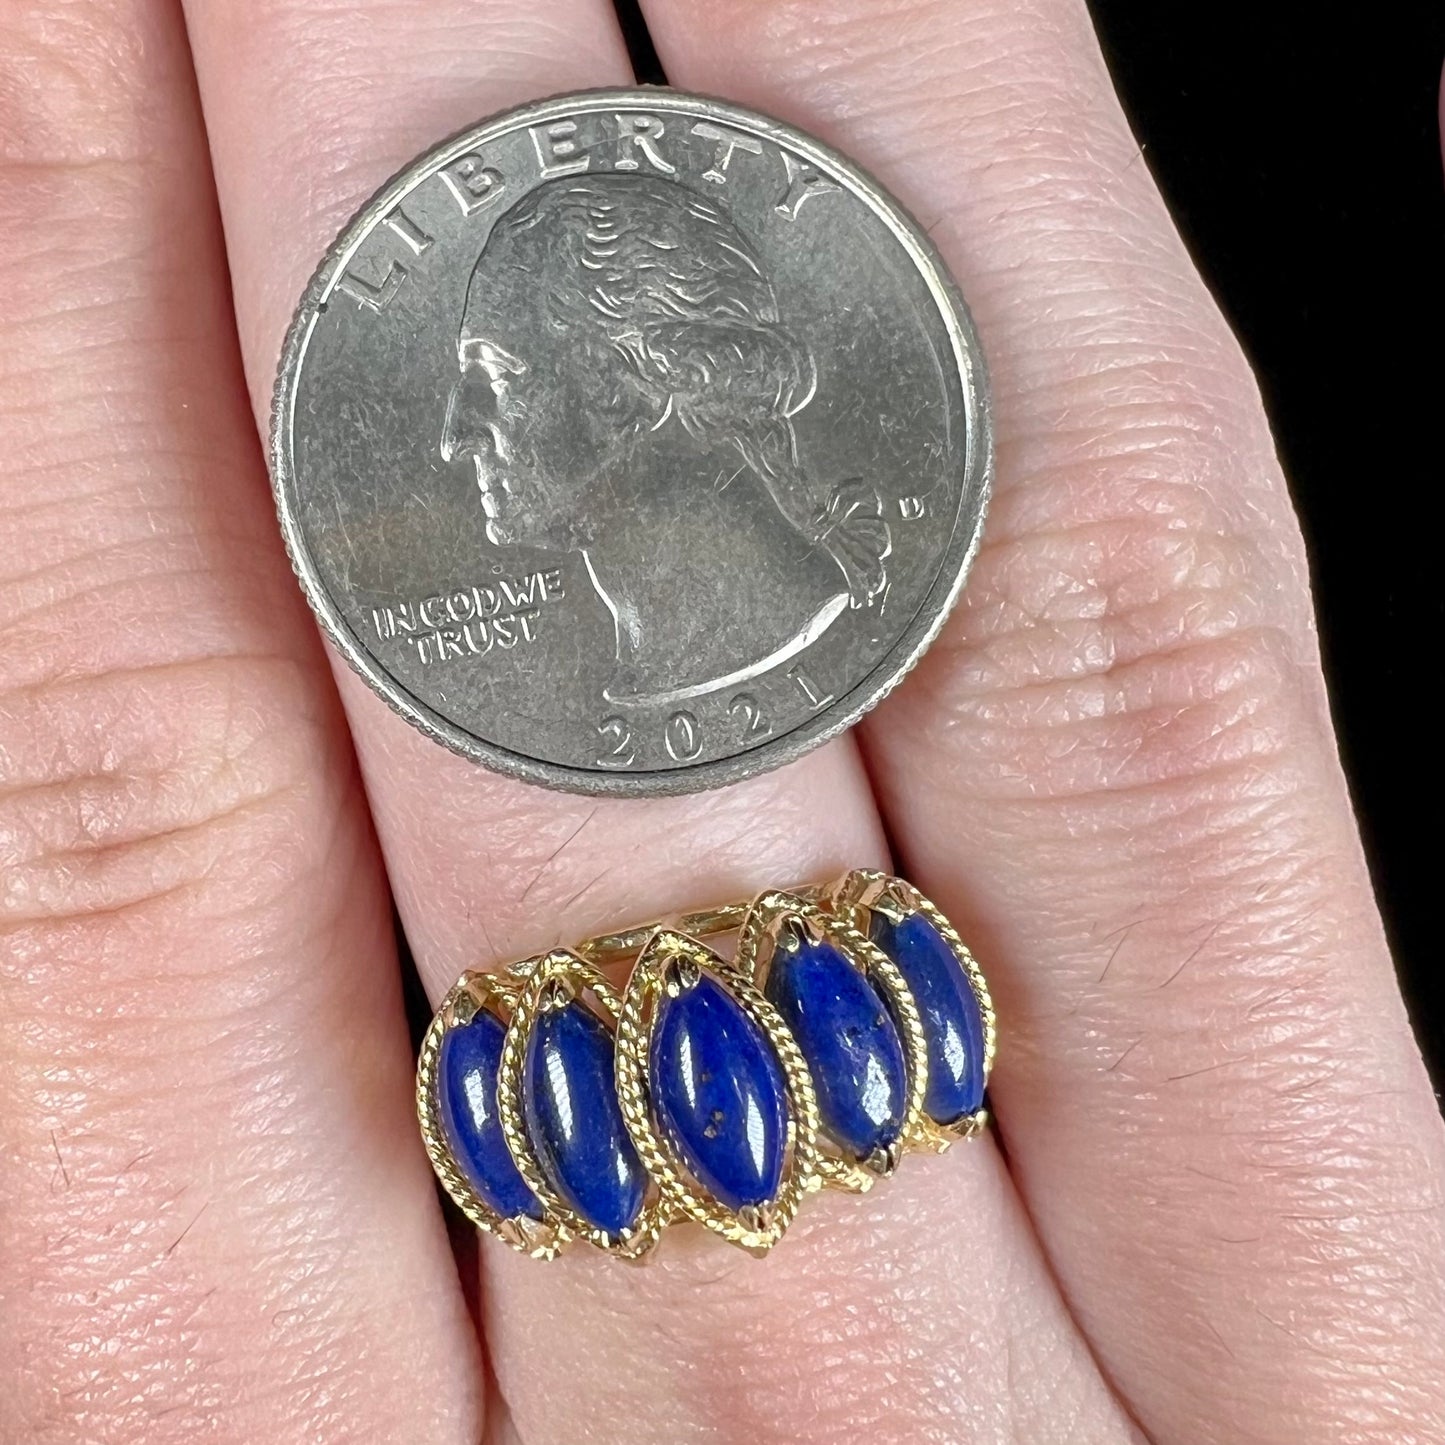 A ladies' five stone marquise cabochon cut lapis lazuli ring in yellow gold.